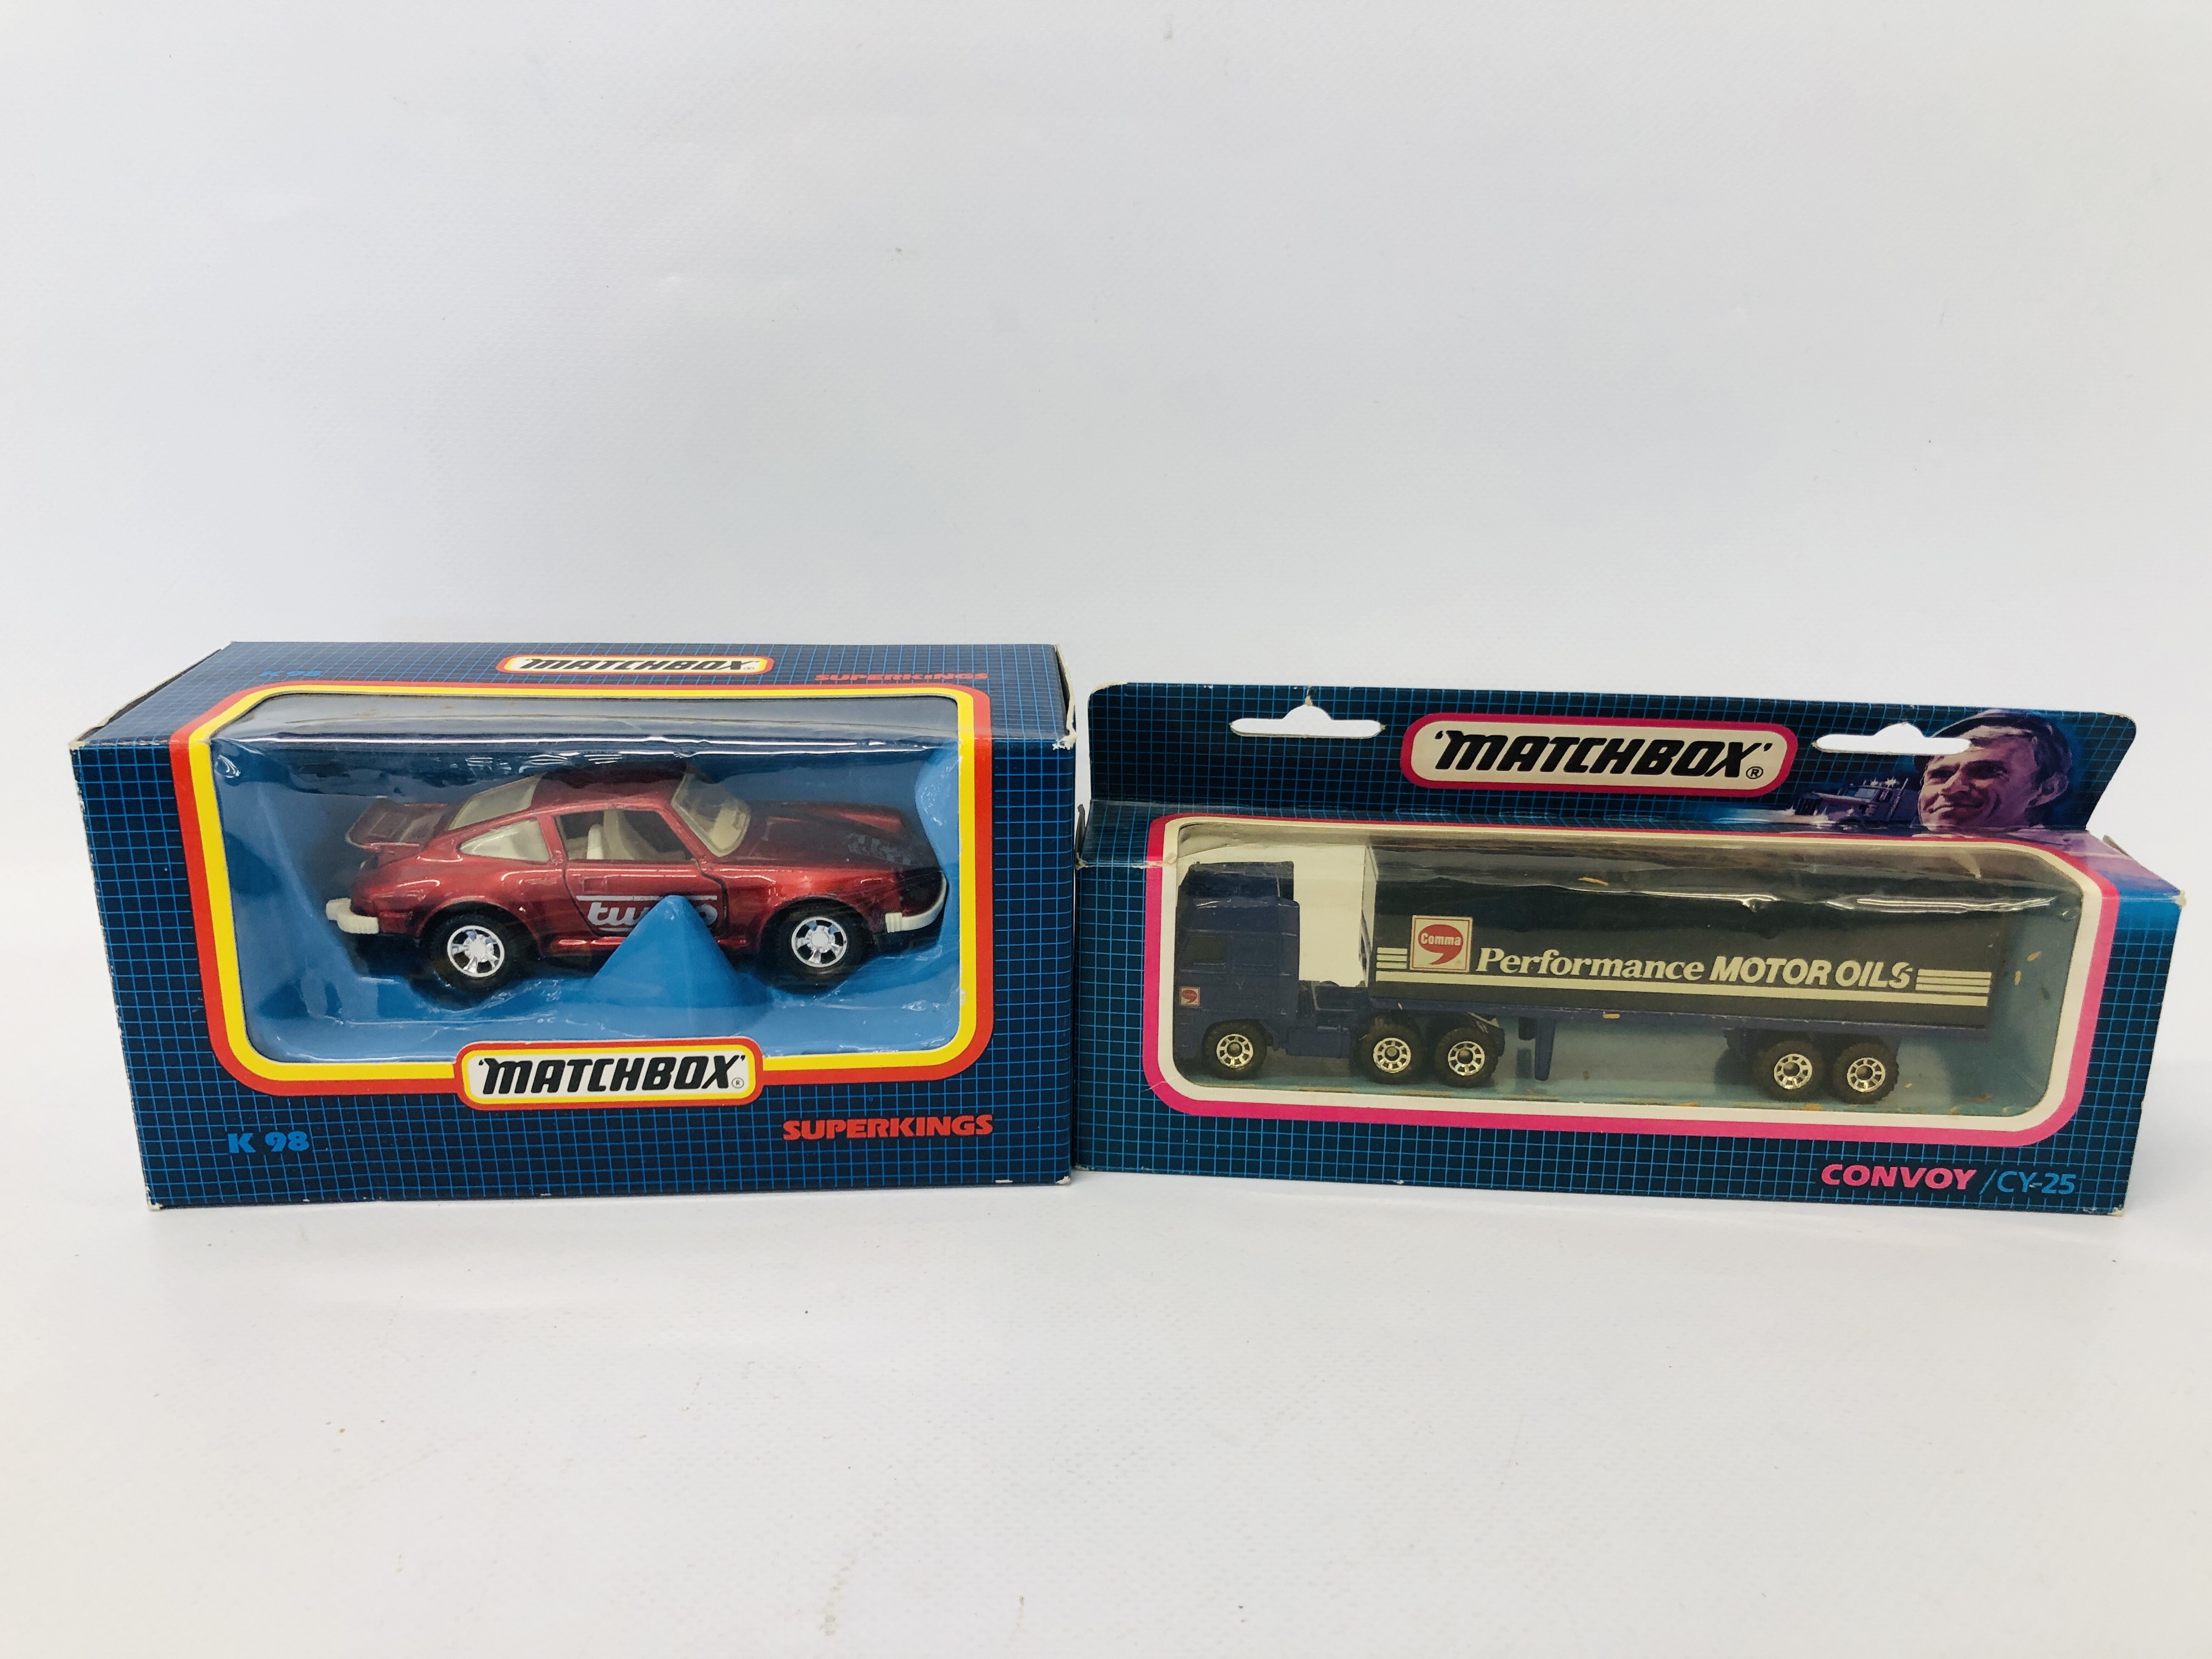 COLLECTION OF VINTAGE MATCHBOX COLLECTORS DIE-CAST MODEL VEHICLES IN ORIGINAL BOXES - Image 2 of 8